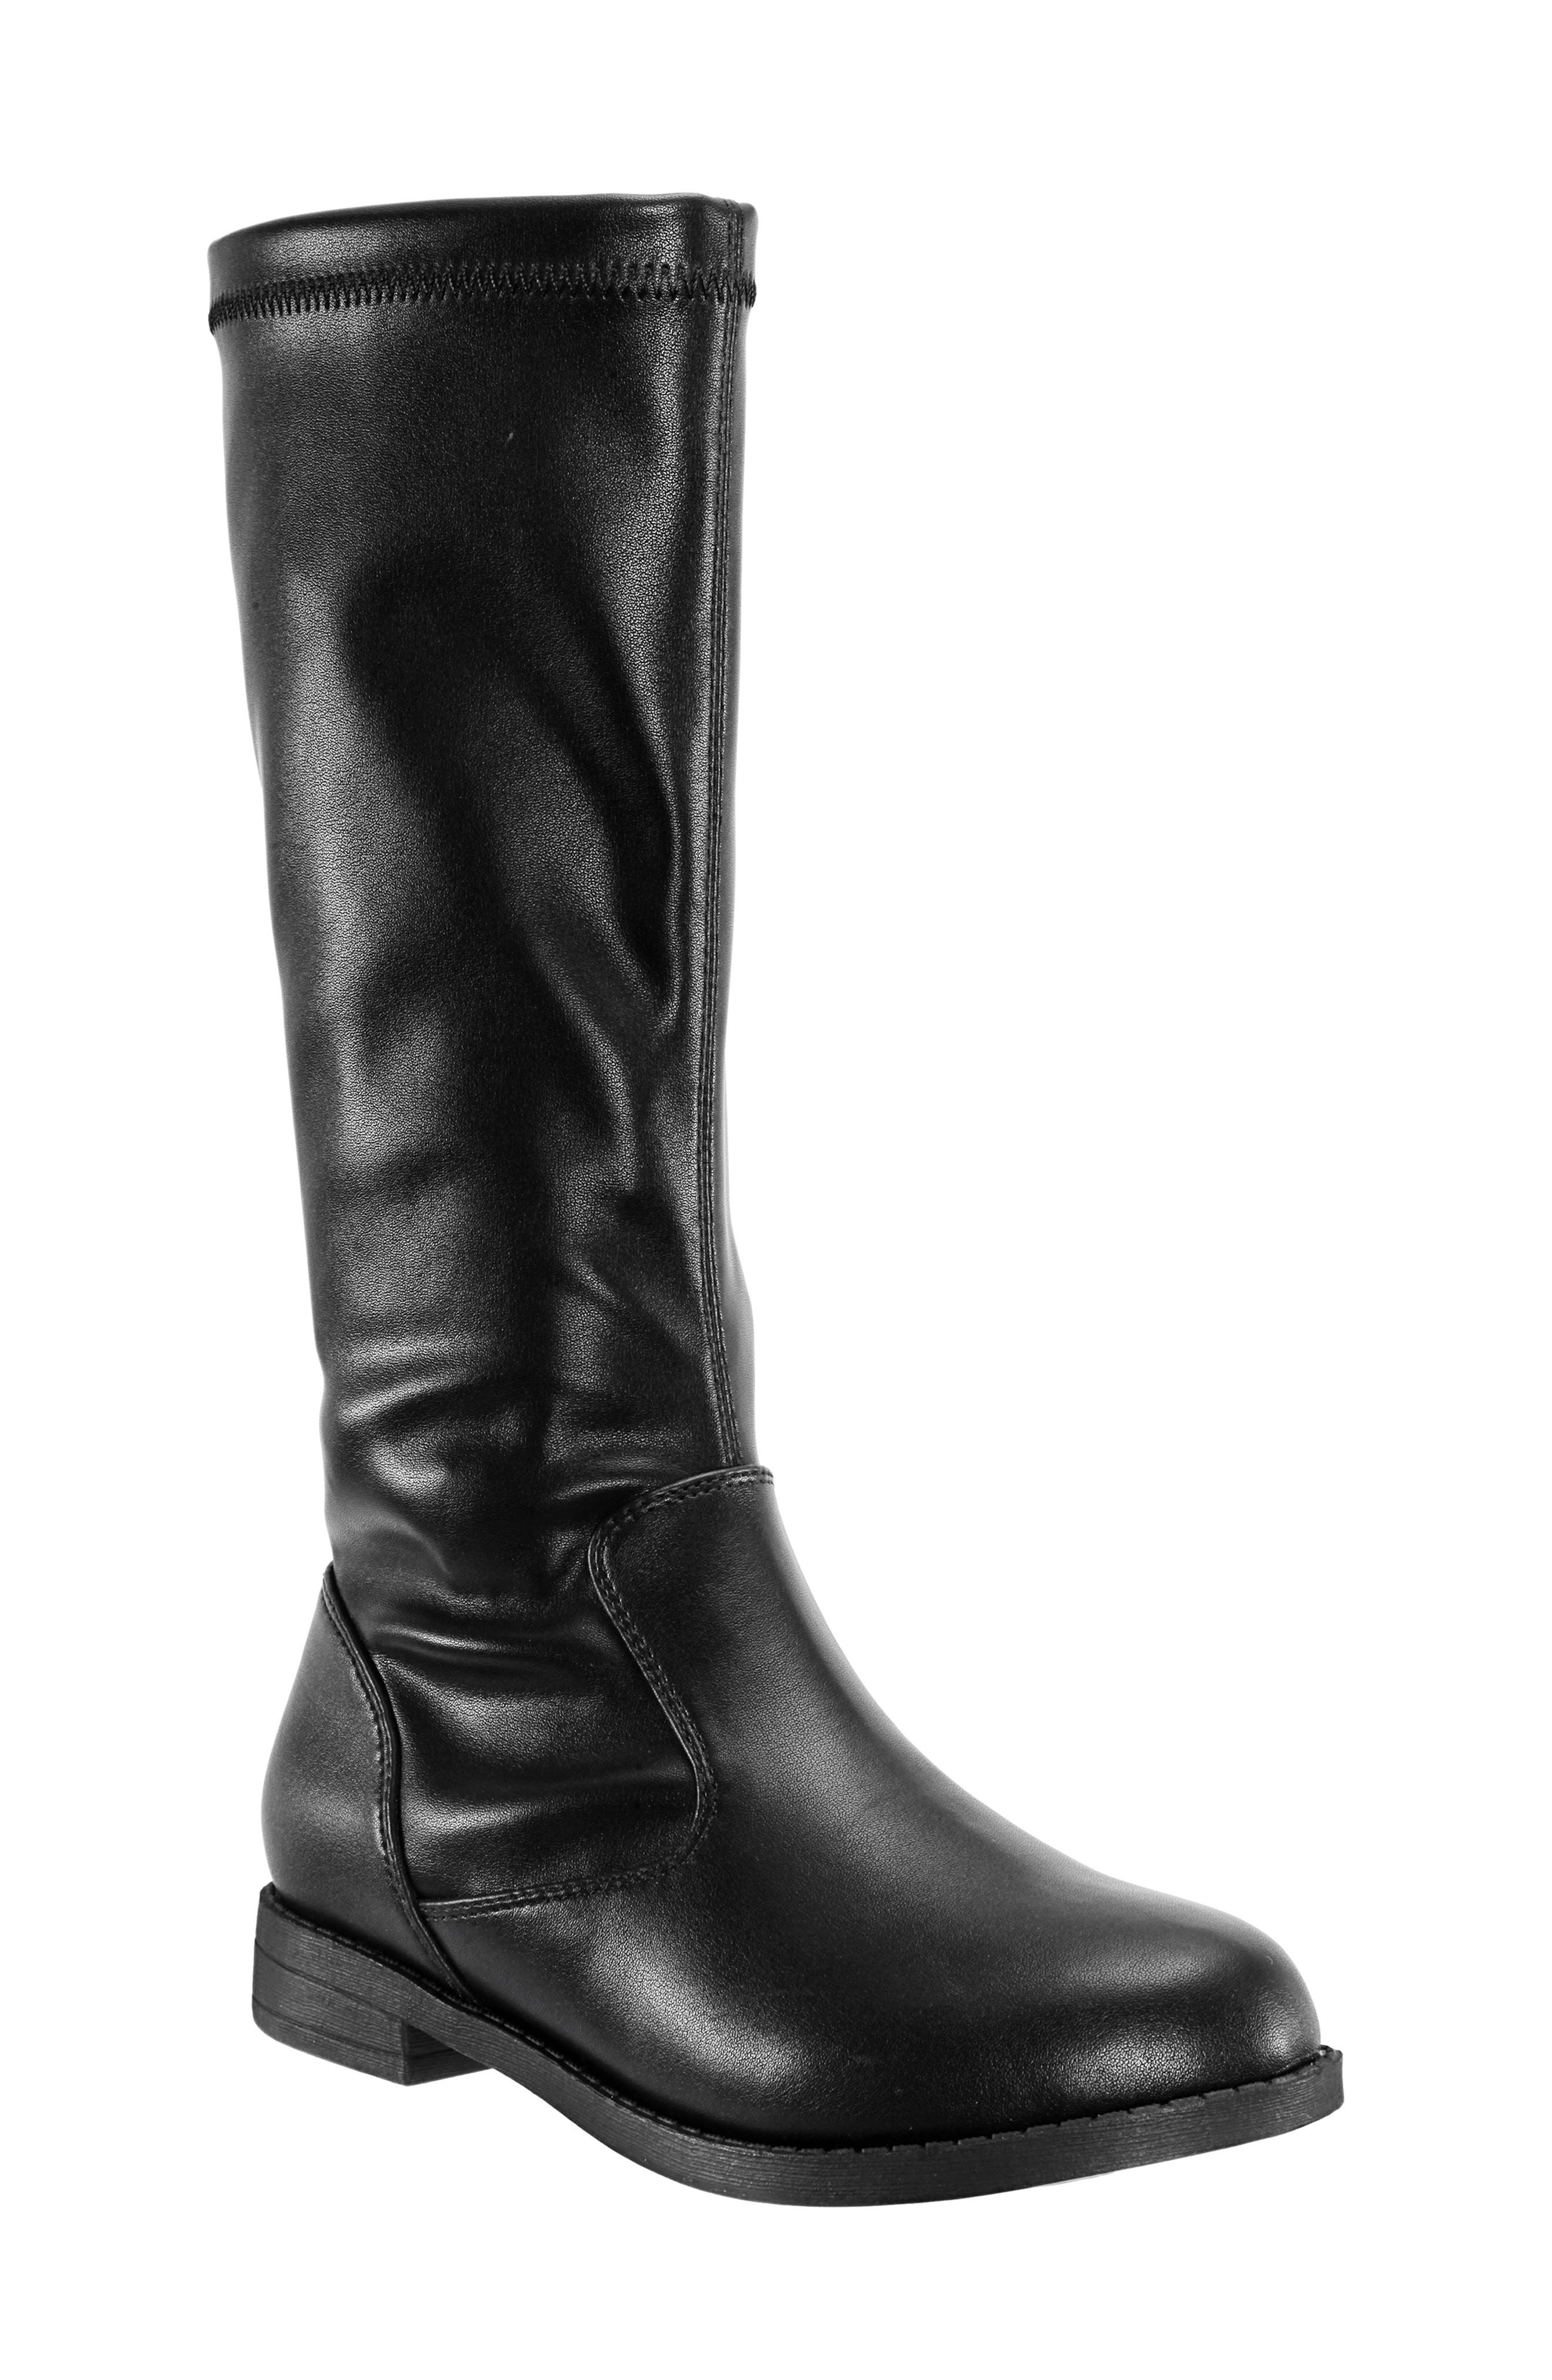 UPC 794378377795 product image for Girl's Nina Zoie Tall Stretch Boot, Size 4 M - Black | upcitemdb.com